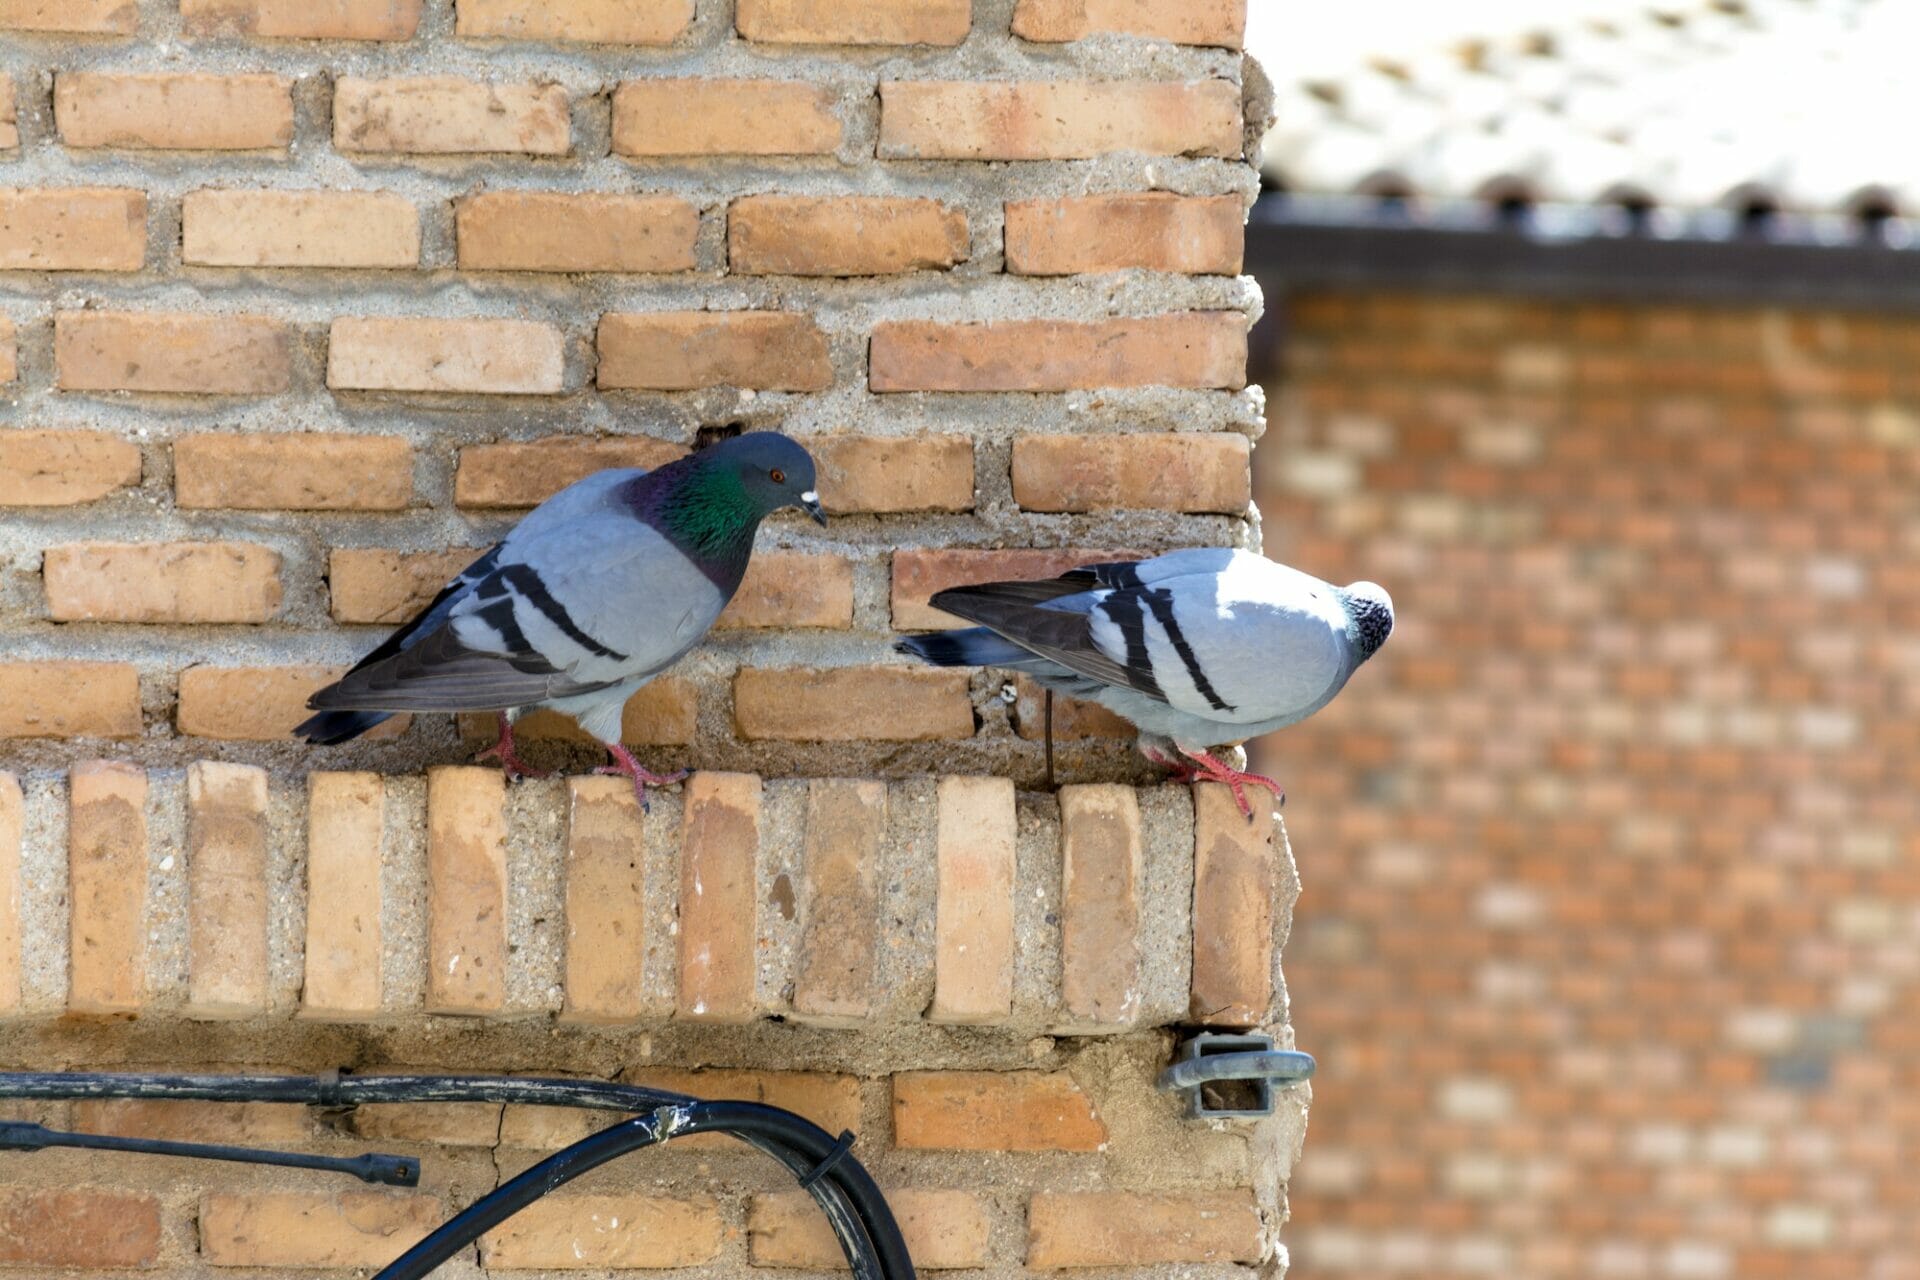 Couple of pigeons climbing a wall. About to fly away.